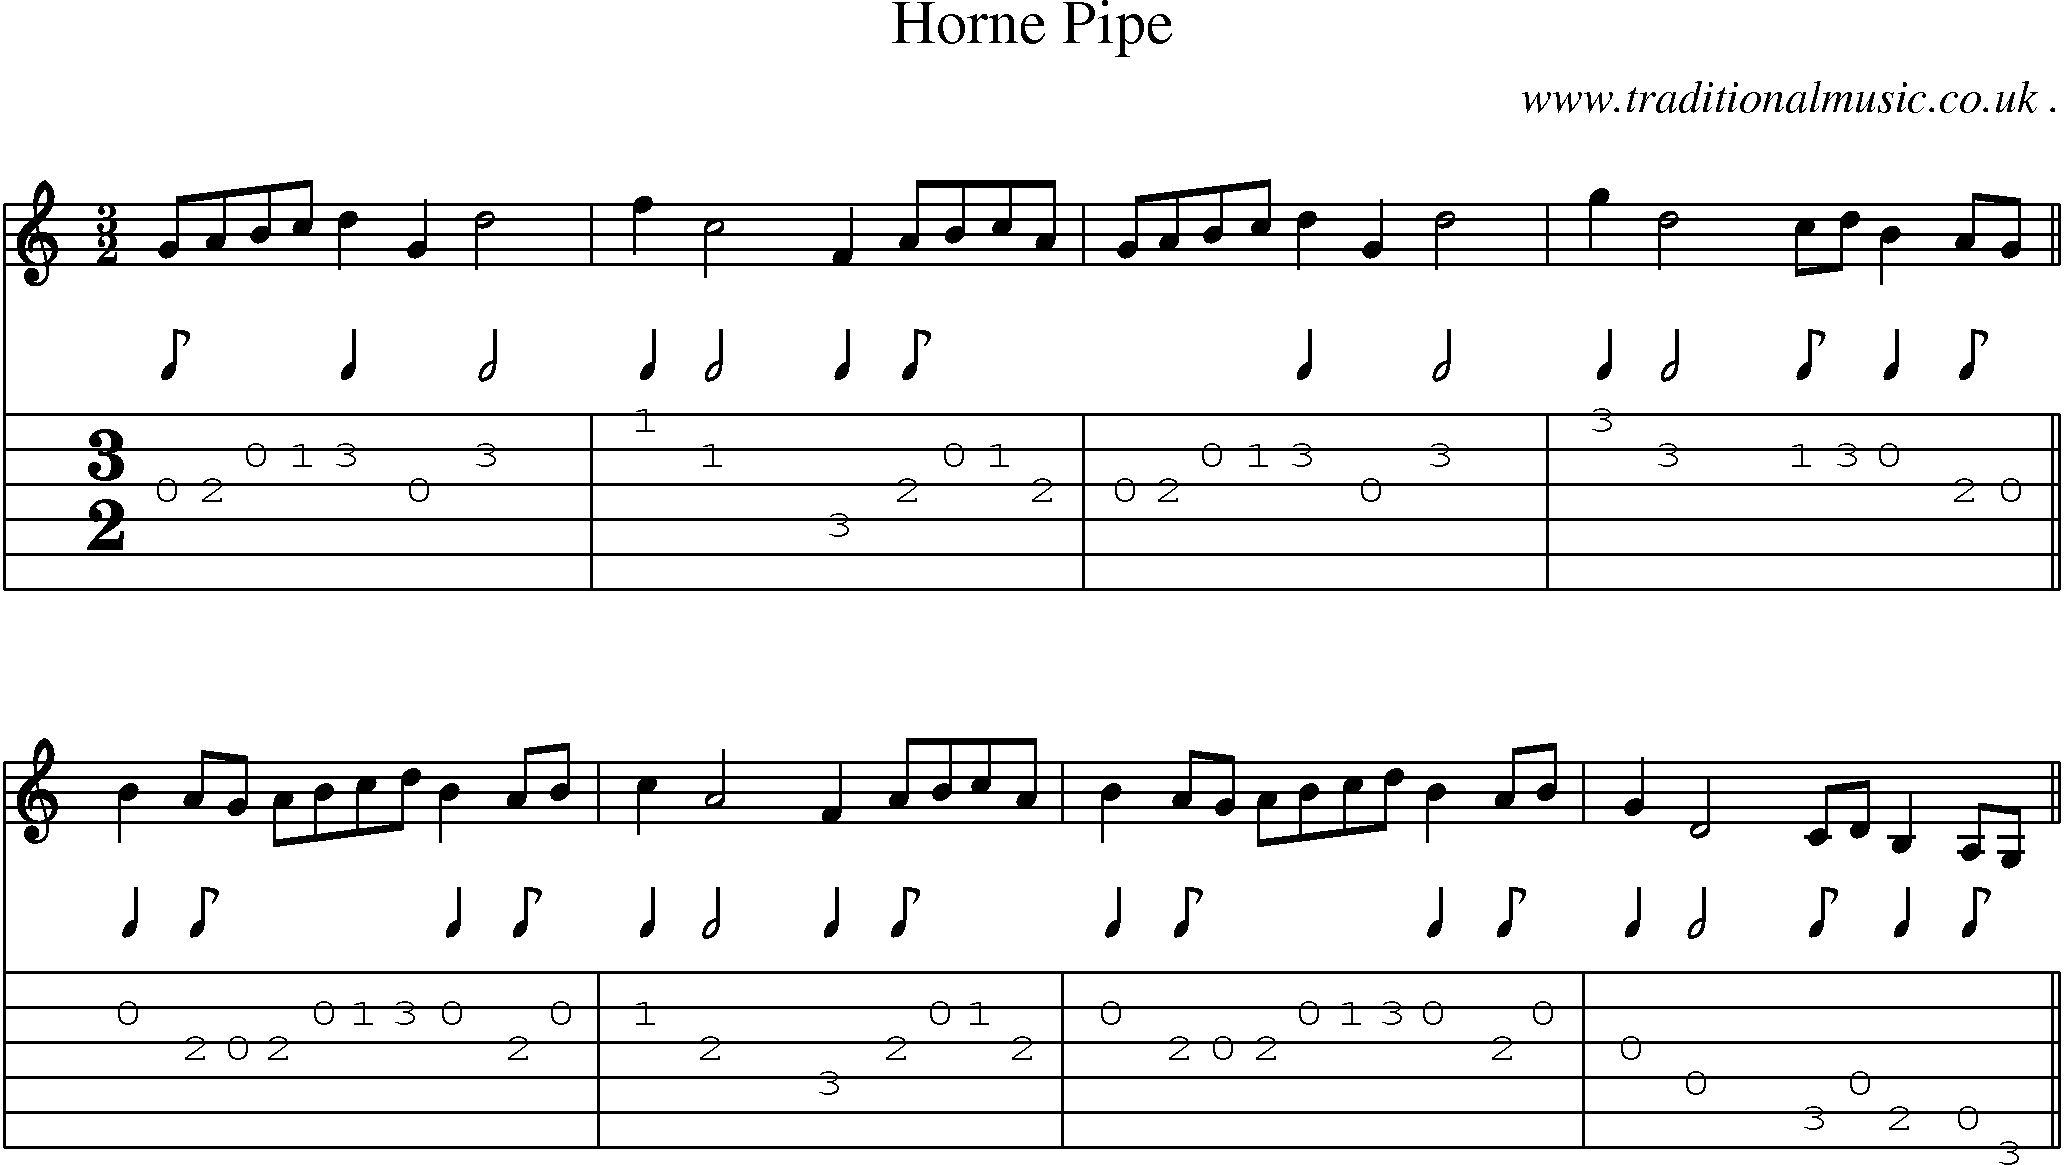 Sheet-music  score, Chords and Guitar Tabs for Horne Pipe